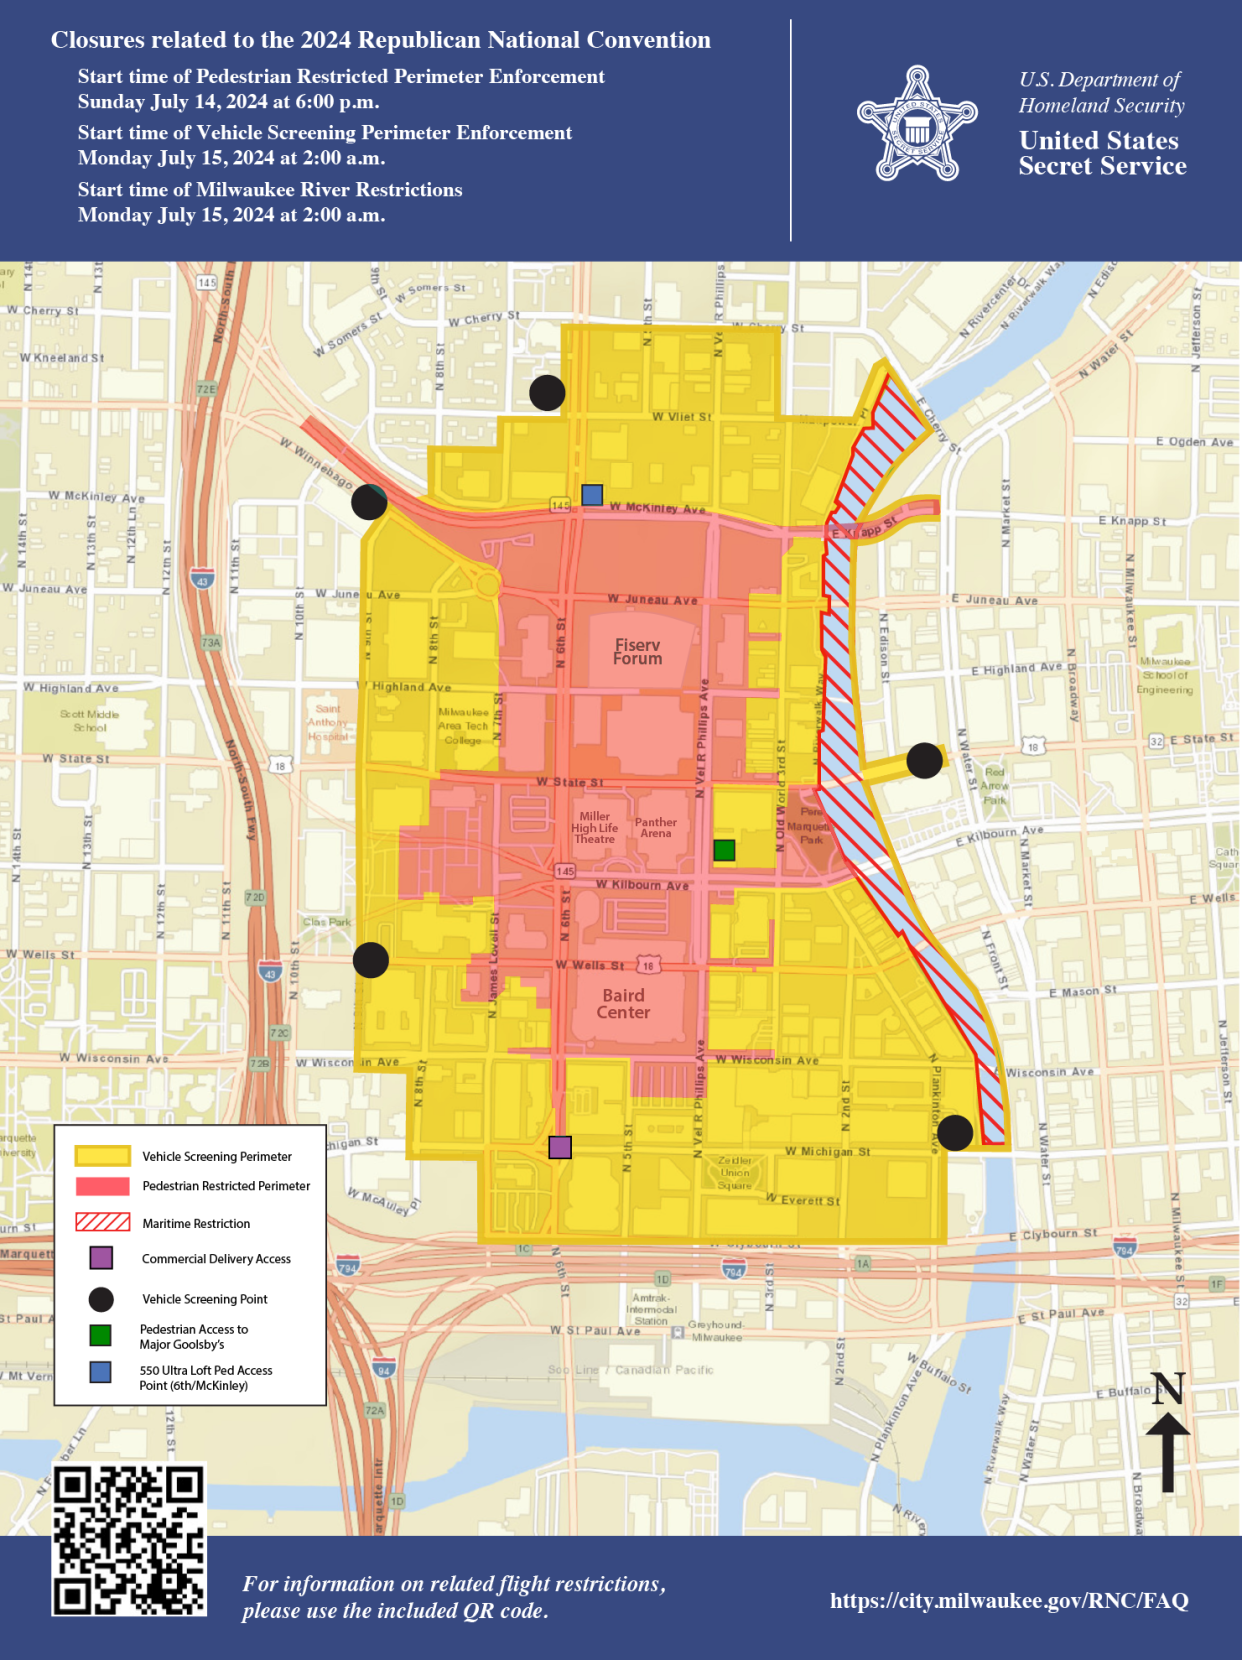 The U.S. Secret Service on released a map of the security zones for the Republican National Convention during a meeting on Friday, June 21, 2024, in downtown Milwaukee. The convention will be centered at Fiserv Forum, UWM Panther Arena and the Baird Center on July 15-18.